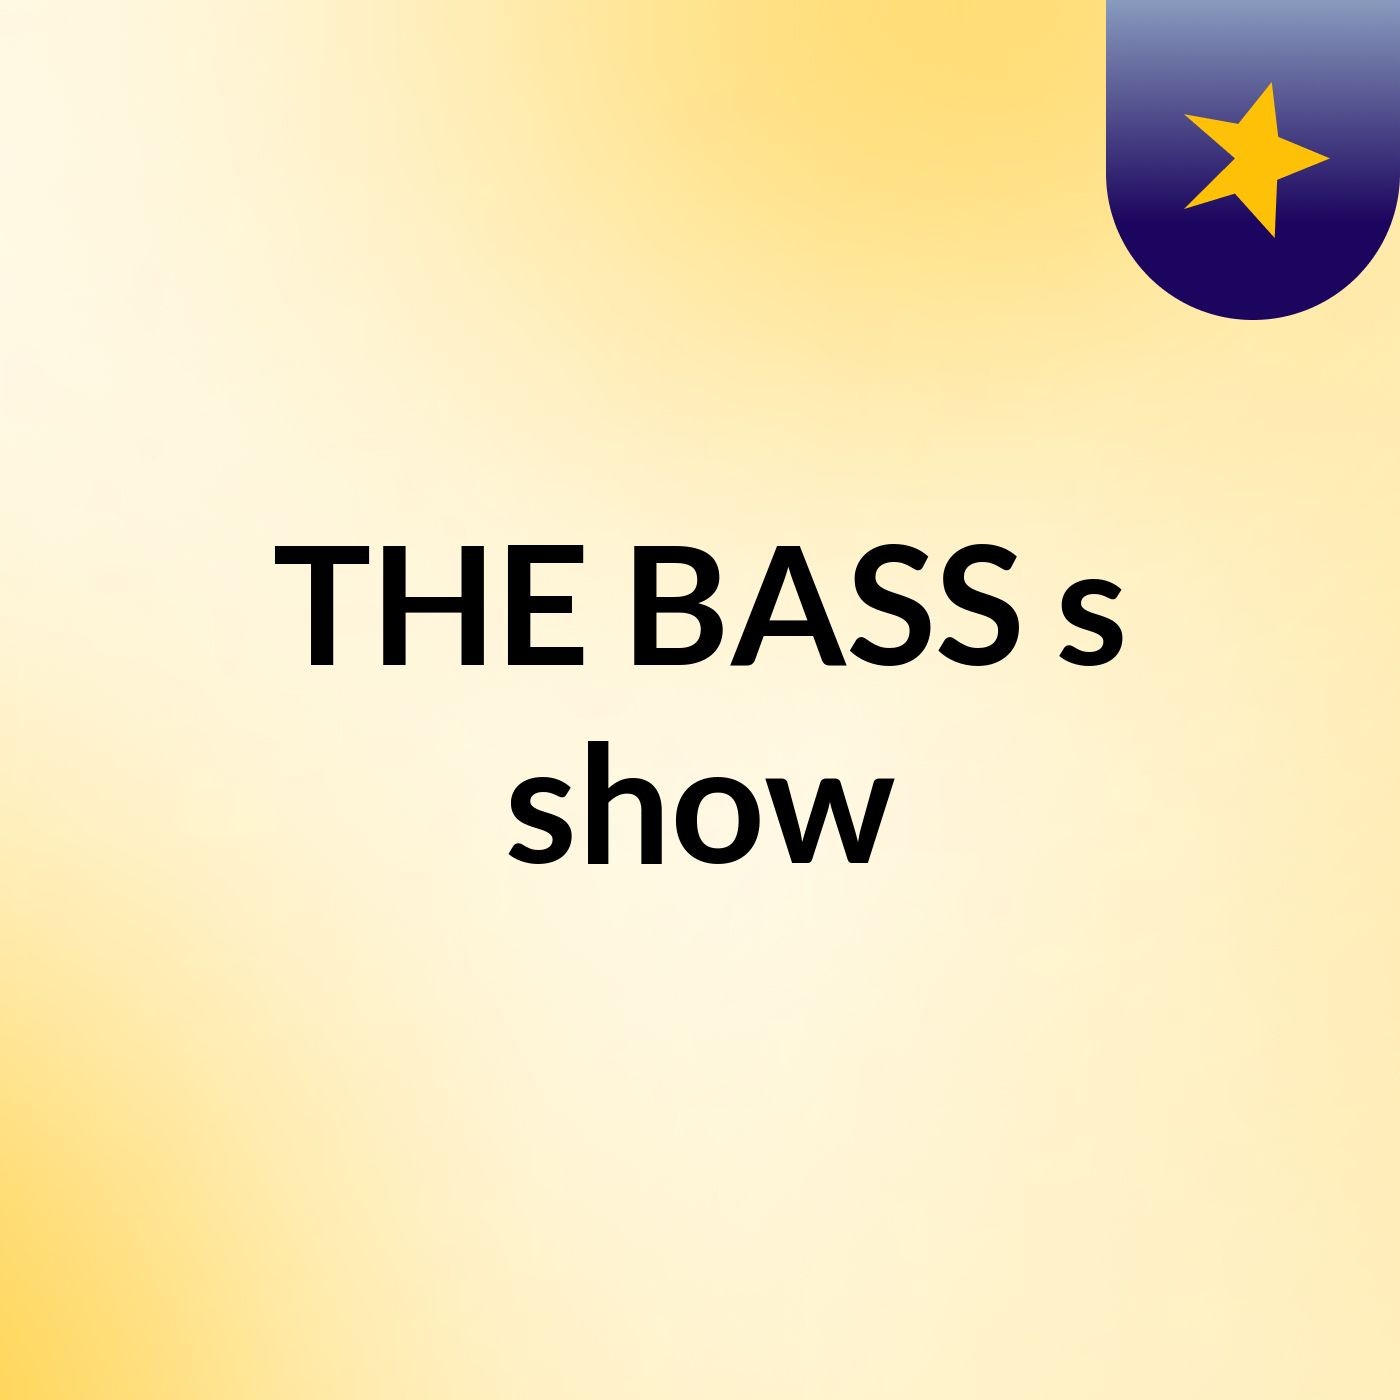 THE BASS's show